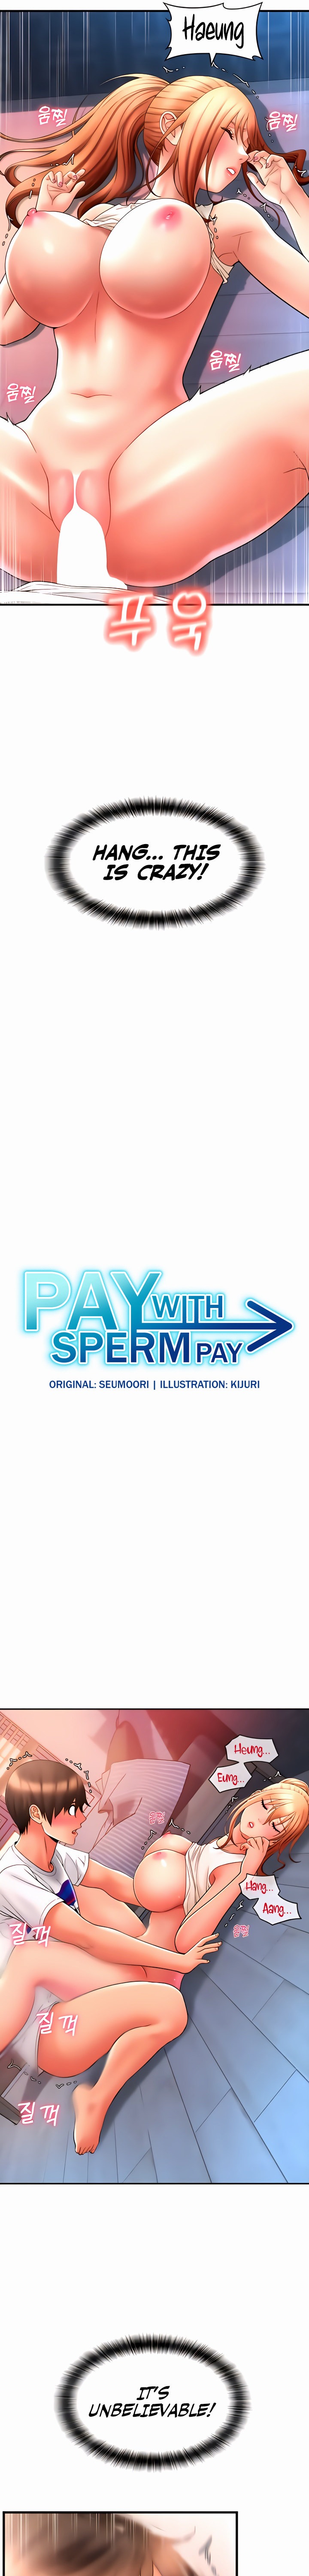 Pay with Sperm Pay - Chapter 26 Page 3